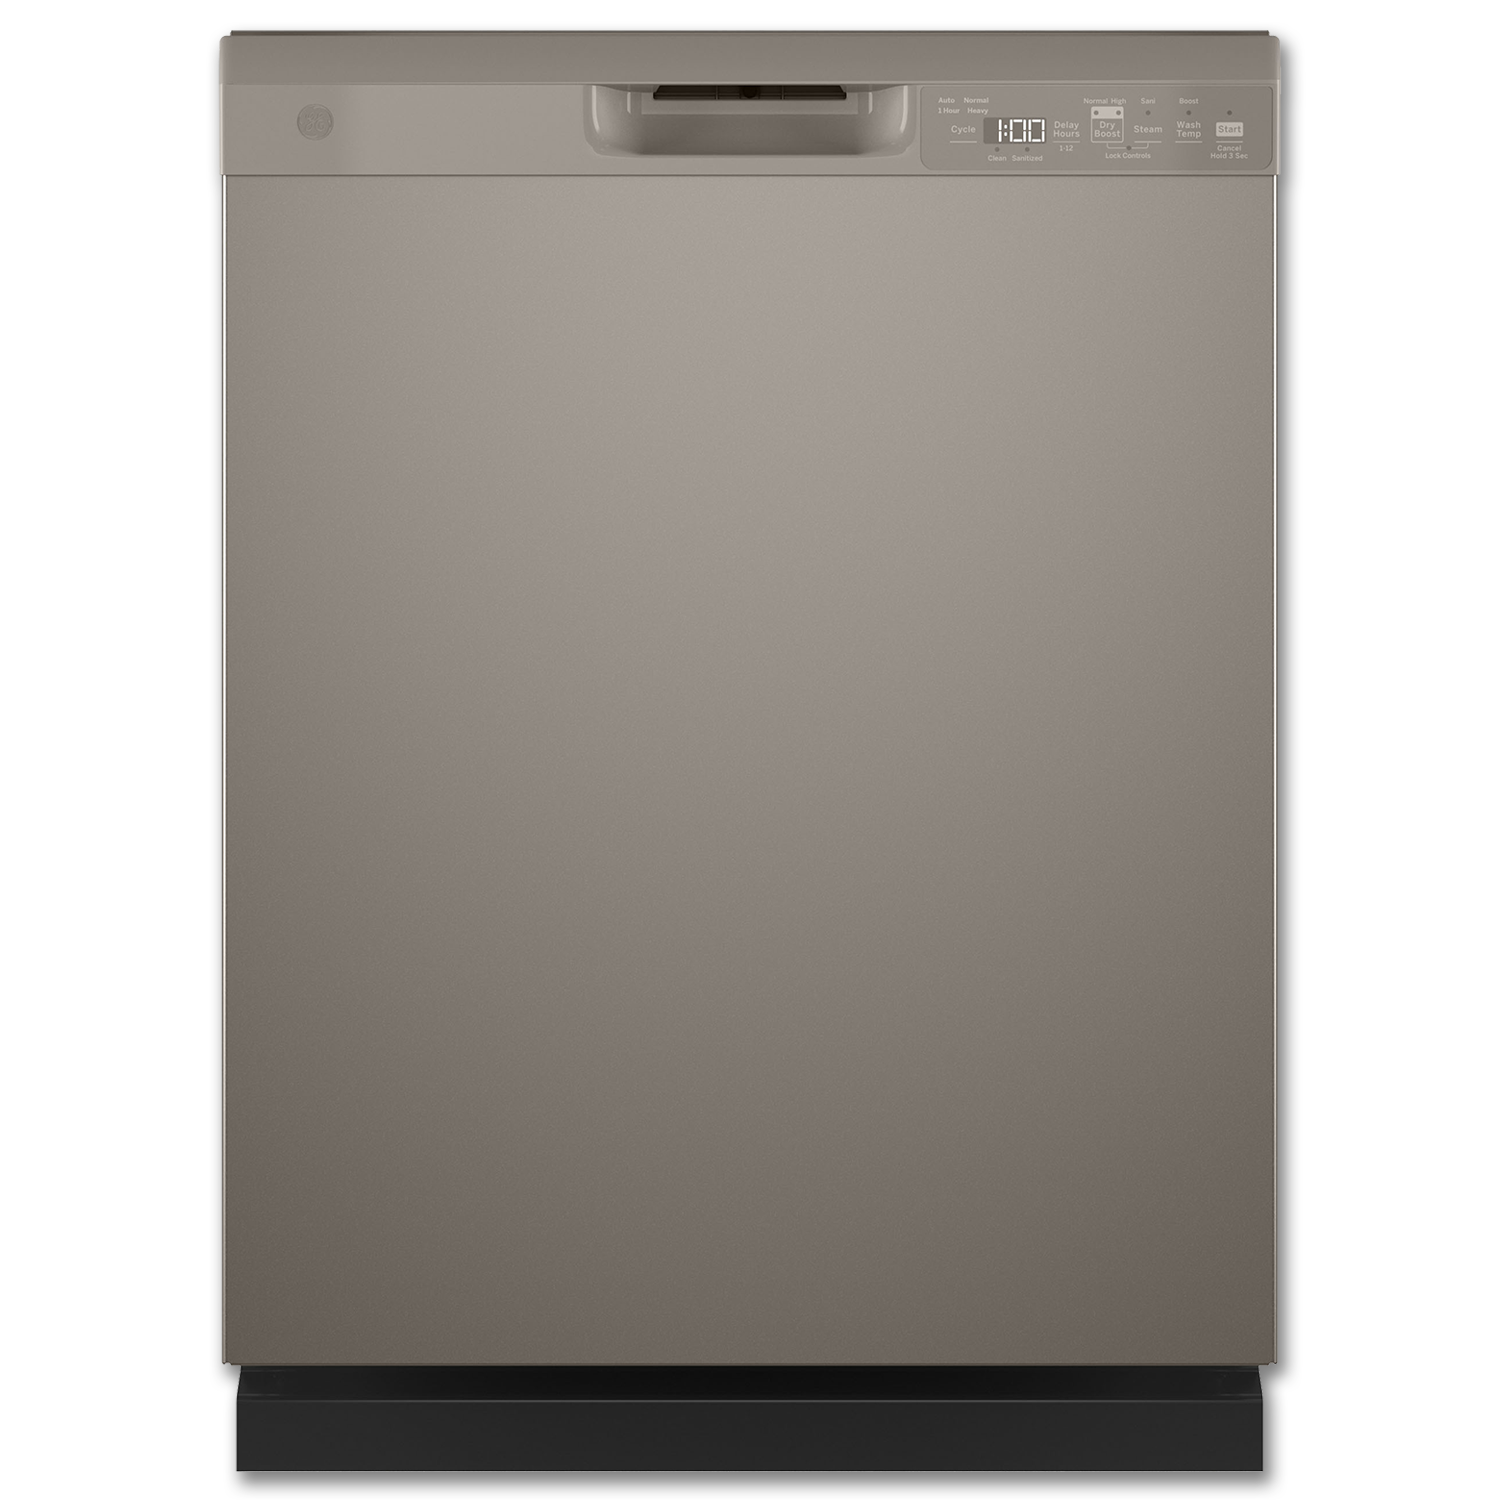 chadwell-supply-ge-energy-star-dishwasher-with-front-controls-slate